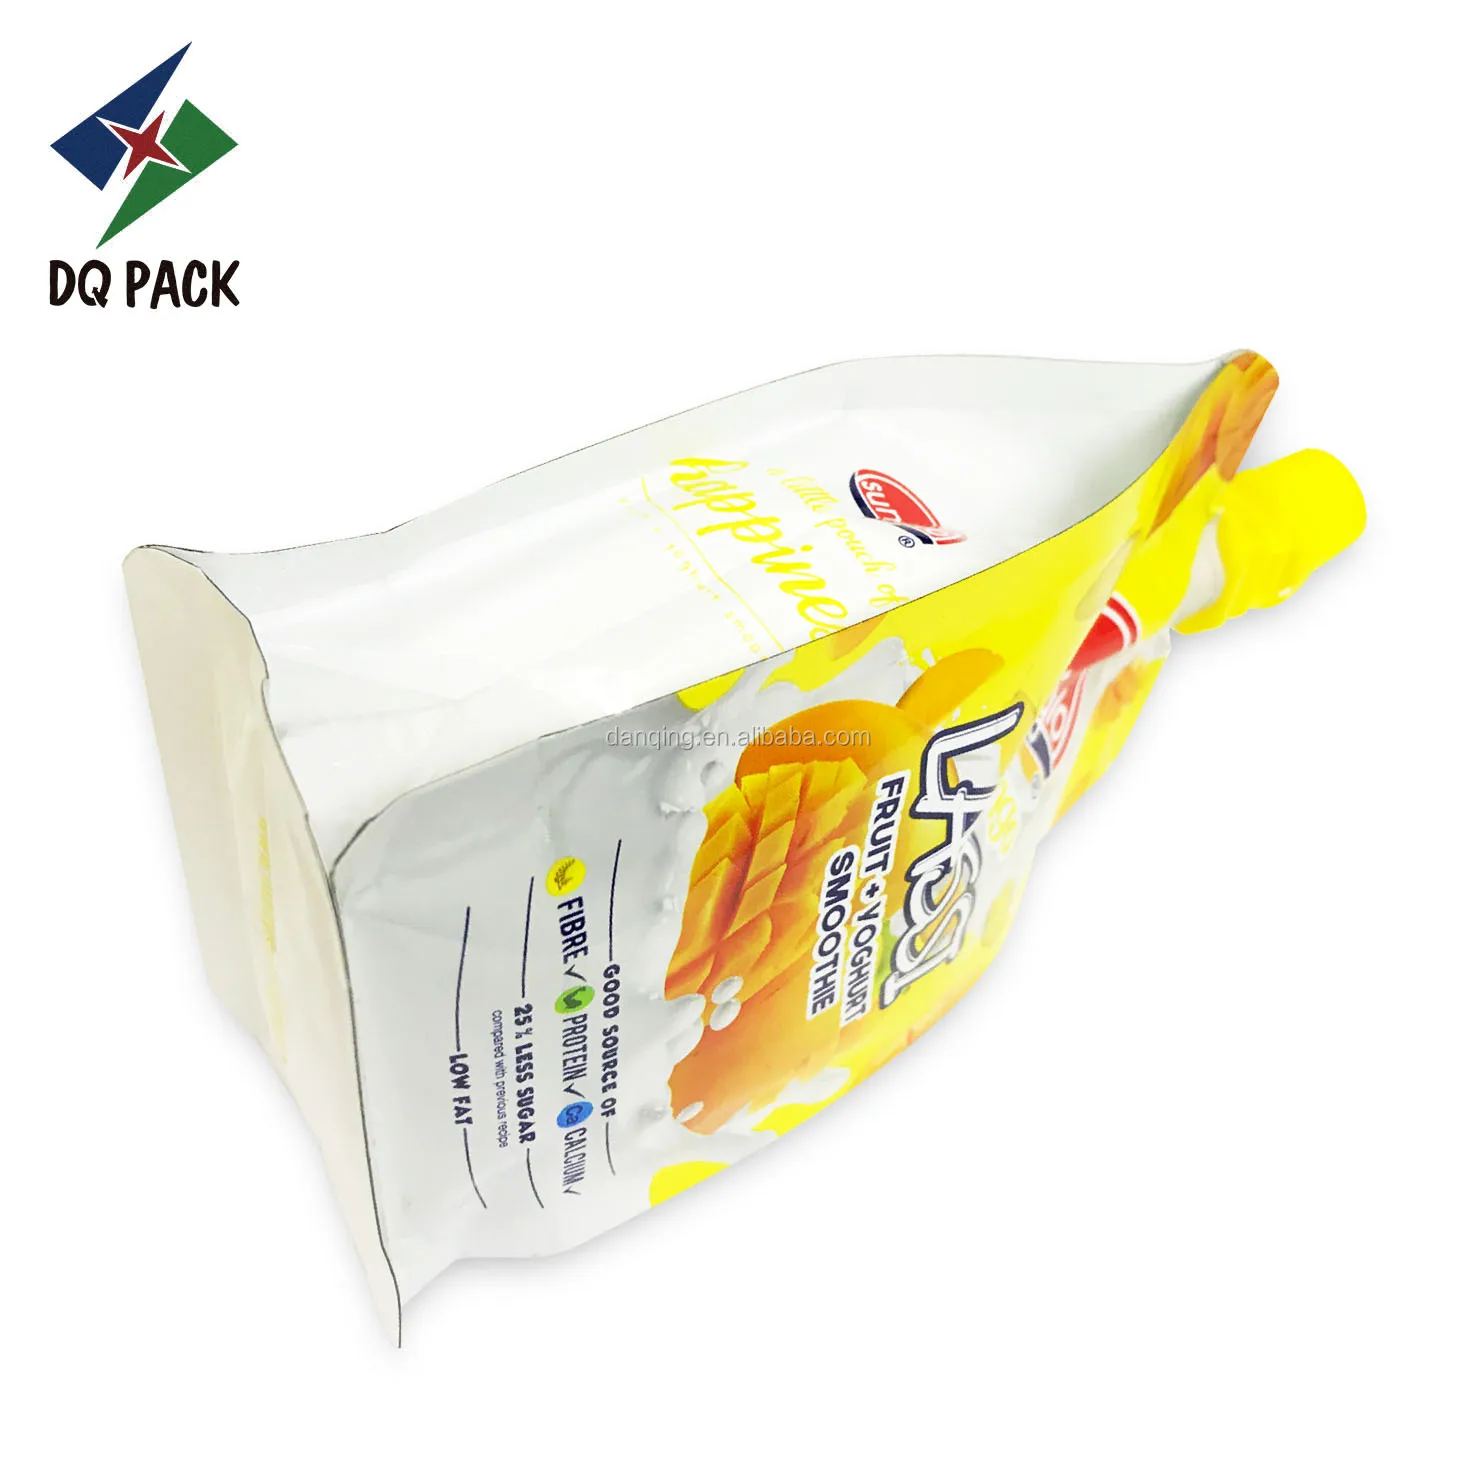 DQ PACK Custom Food Grade Baby Food Spout Pouch Packaging For Soft Drink Juice